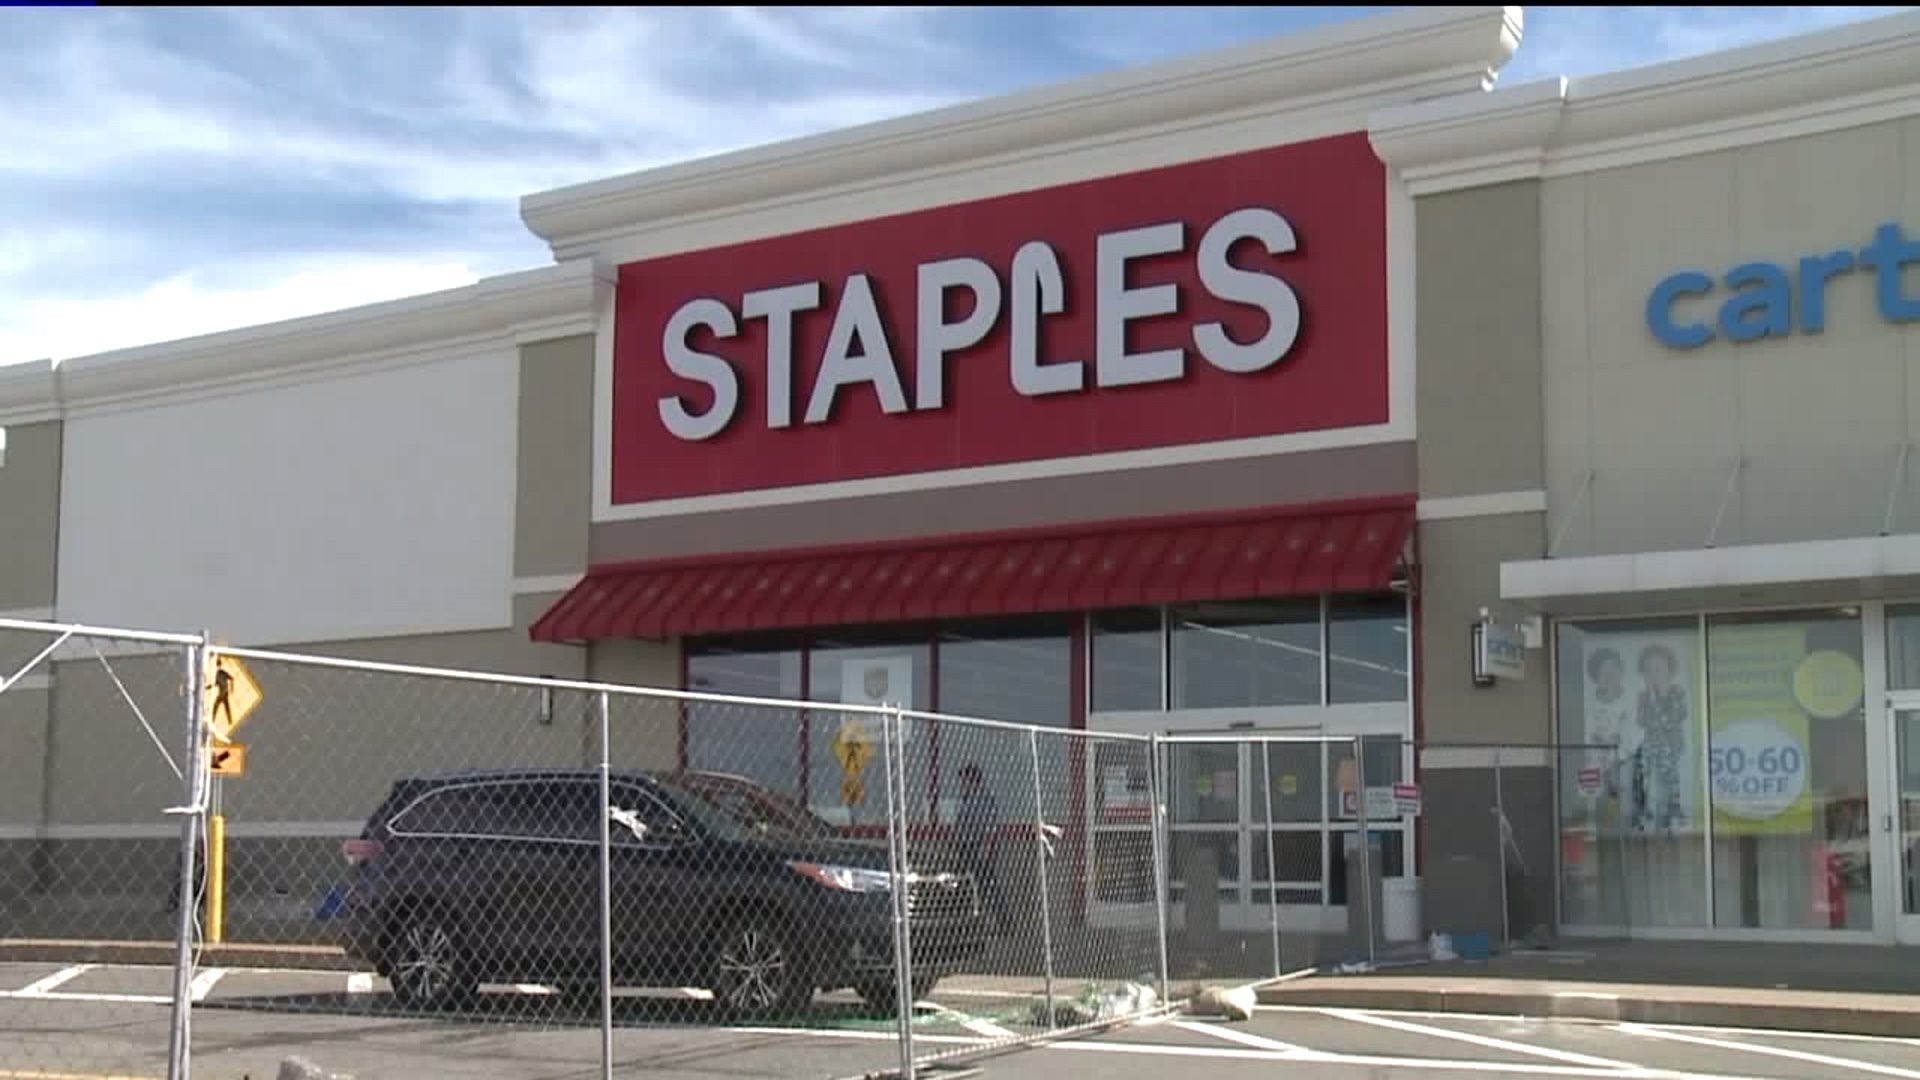 Staples Reopening Three Months After Tornado